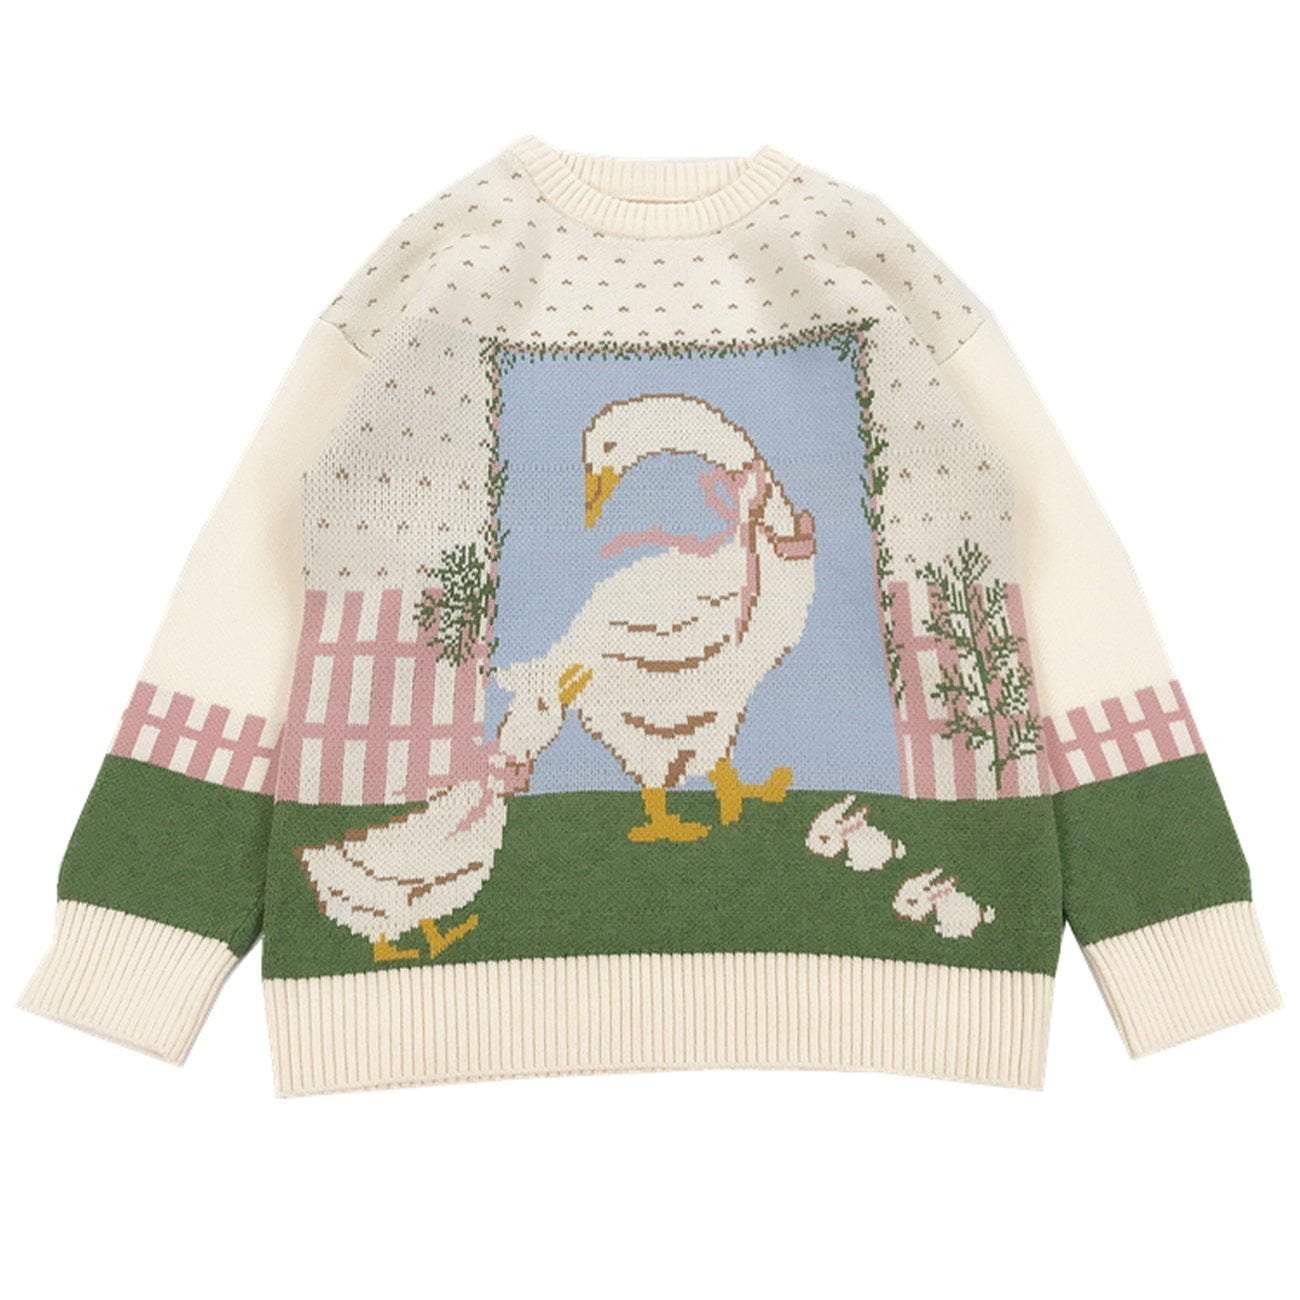 WLS Printing Cartoons Knitting Buttoned Sweater